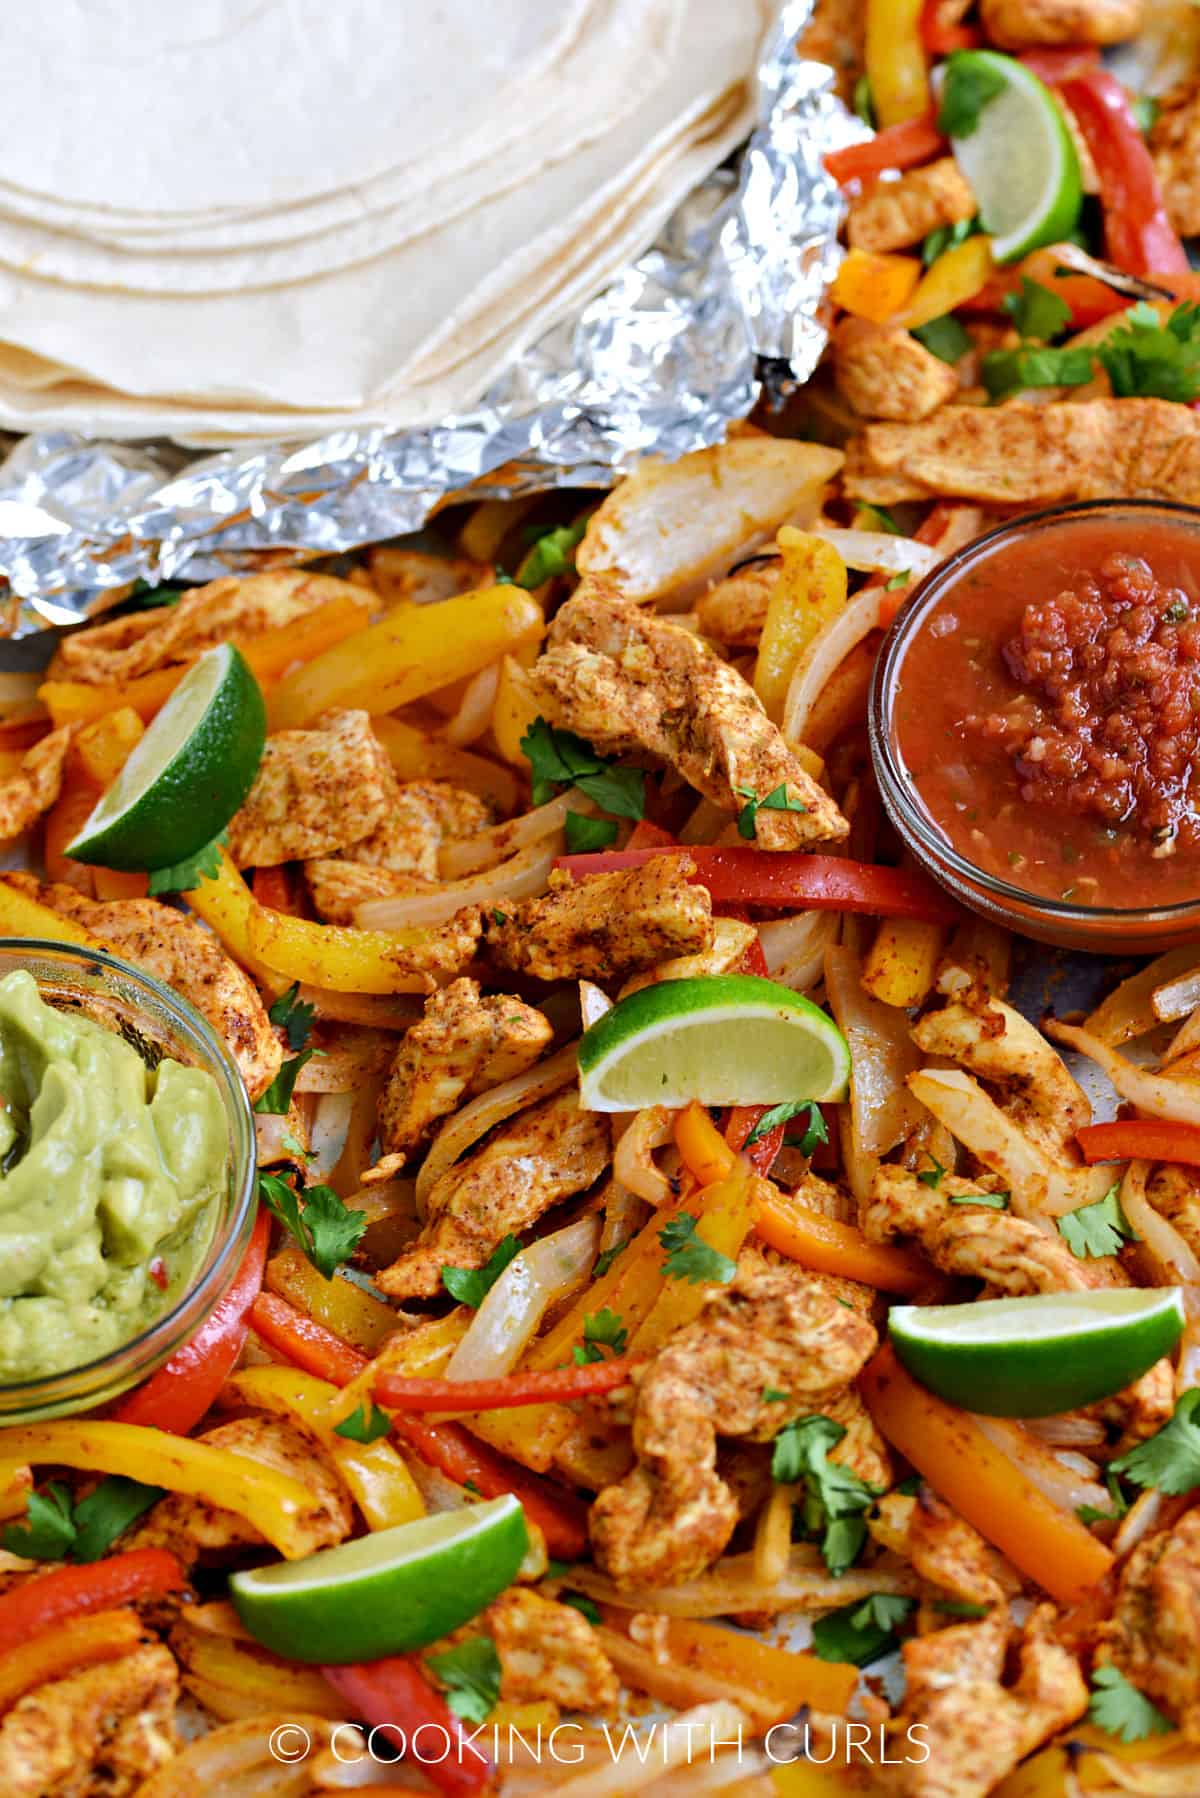 Strips of chicken, onion, red, orange and yellow bell peppers on a sheet pan with bowls of guacamole and salsa, and flour tortillas in the upper left corner.